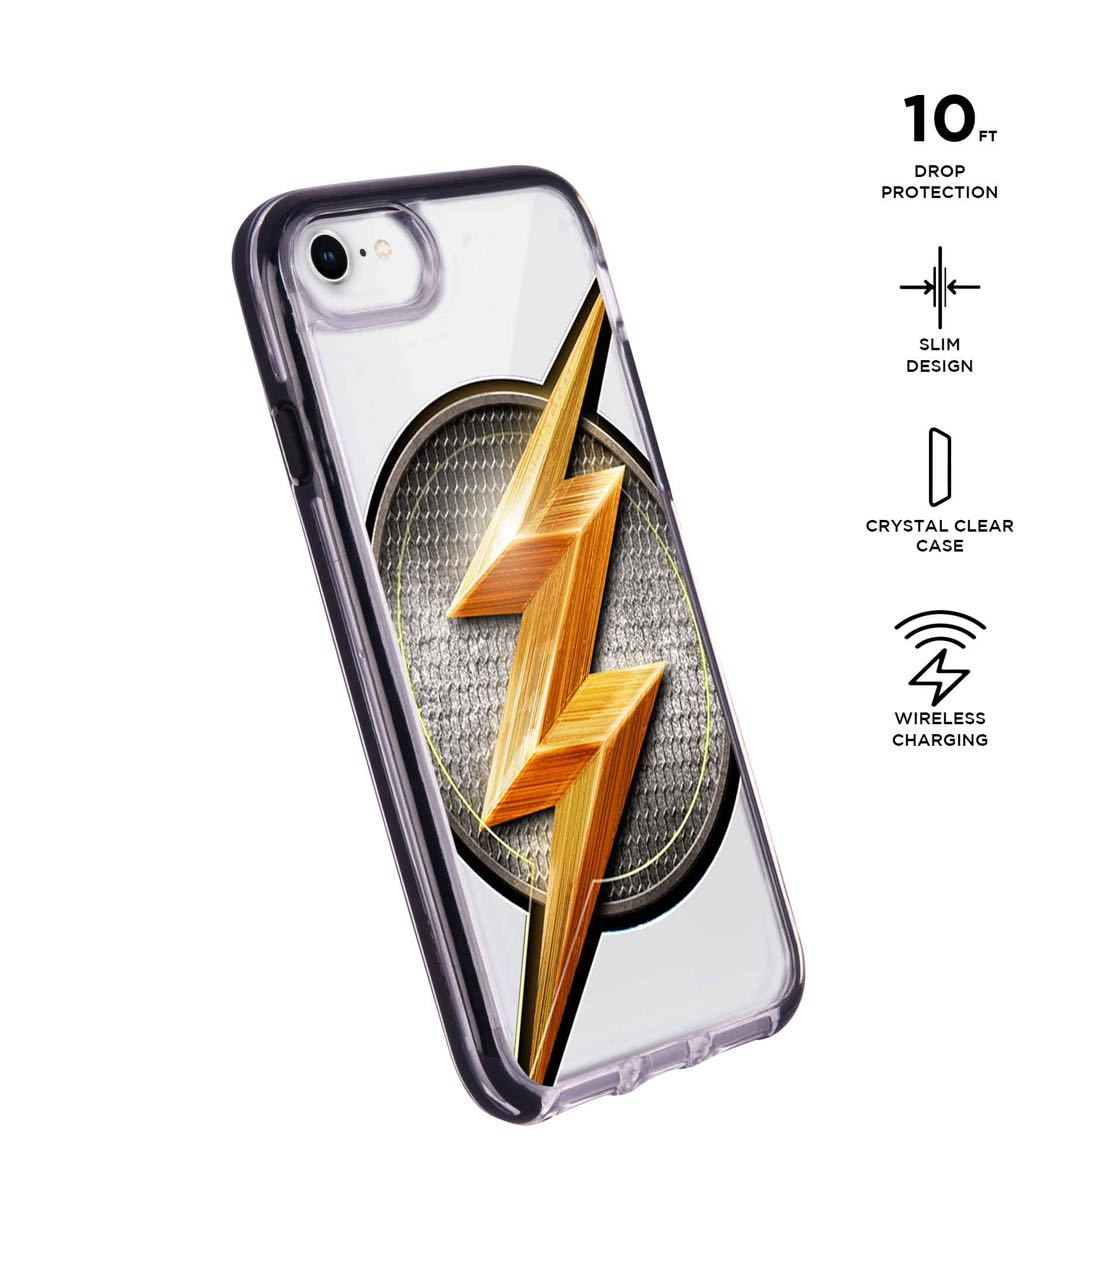 Flash Storm - Extreme Phone Case for iPhone 8